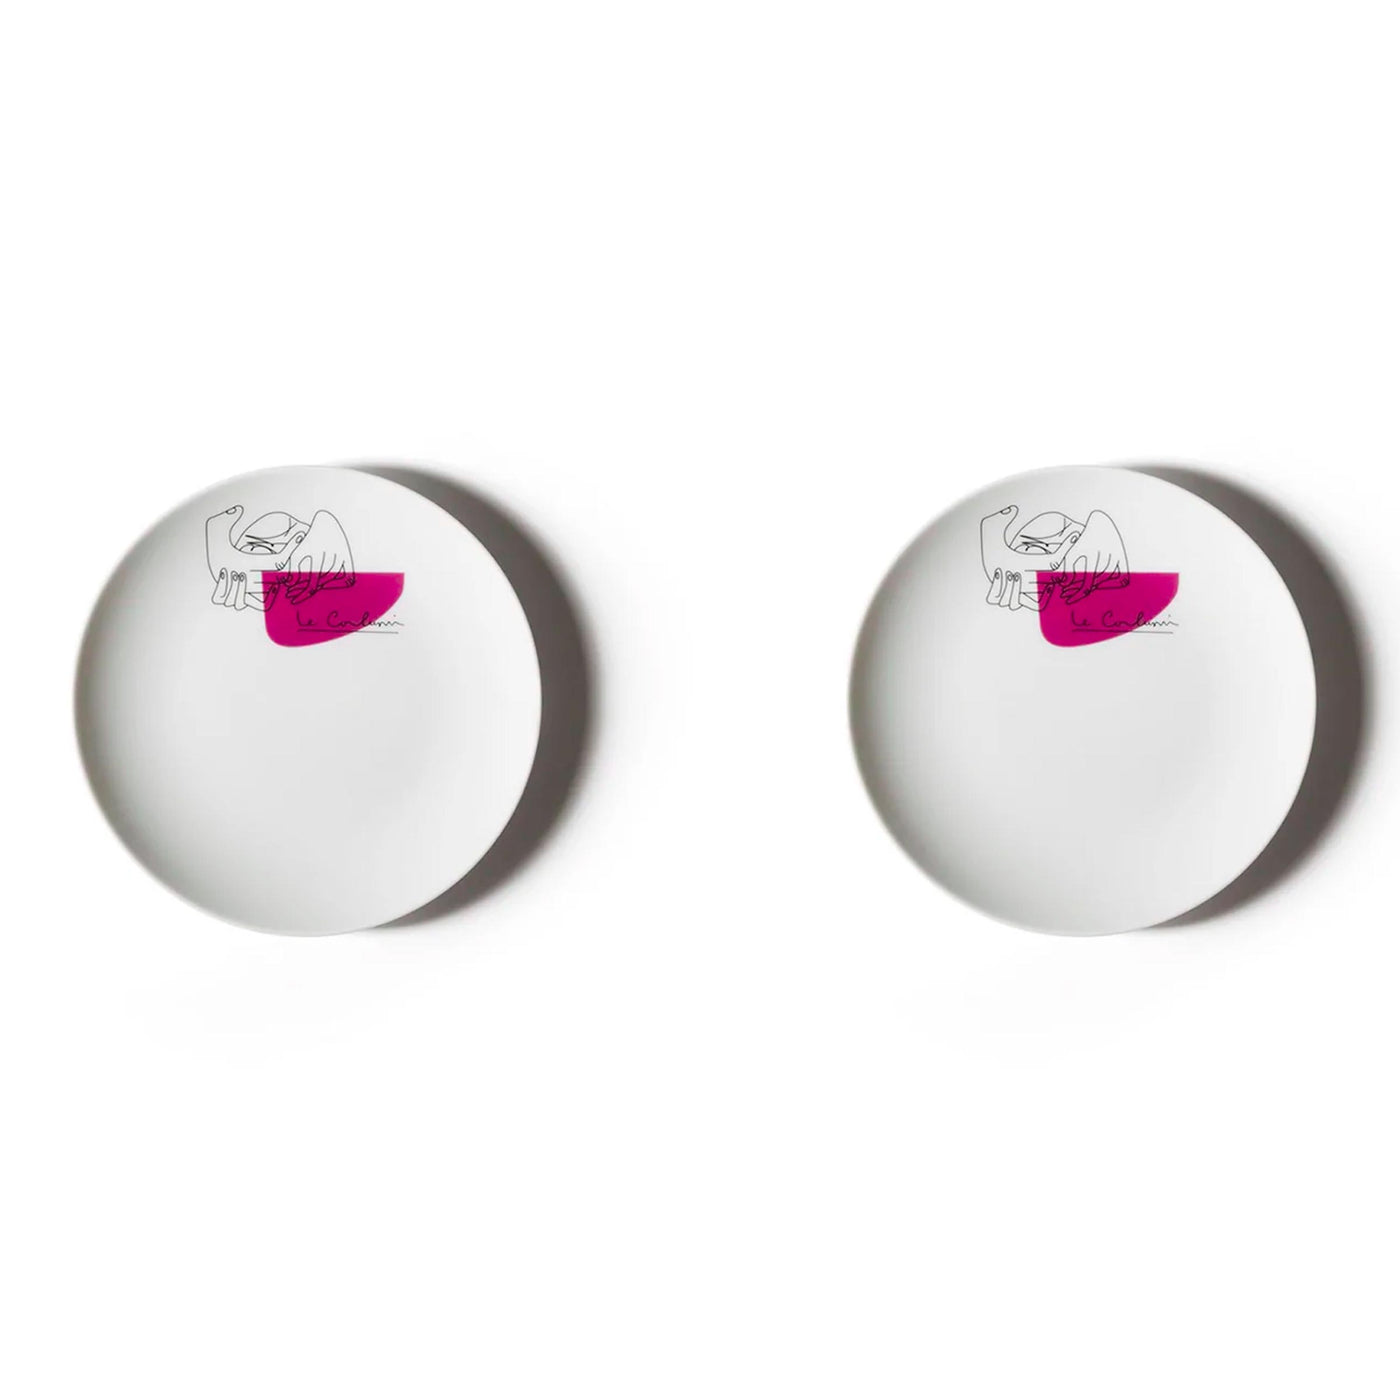 Porcelain Dessert Plates SERVICE PRUNIER Set of Two, designed by Richard Ginori for Cassina 01